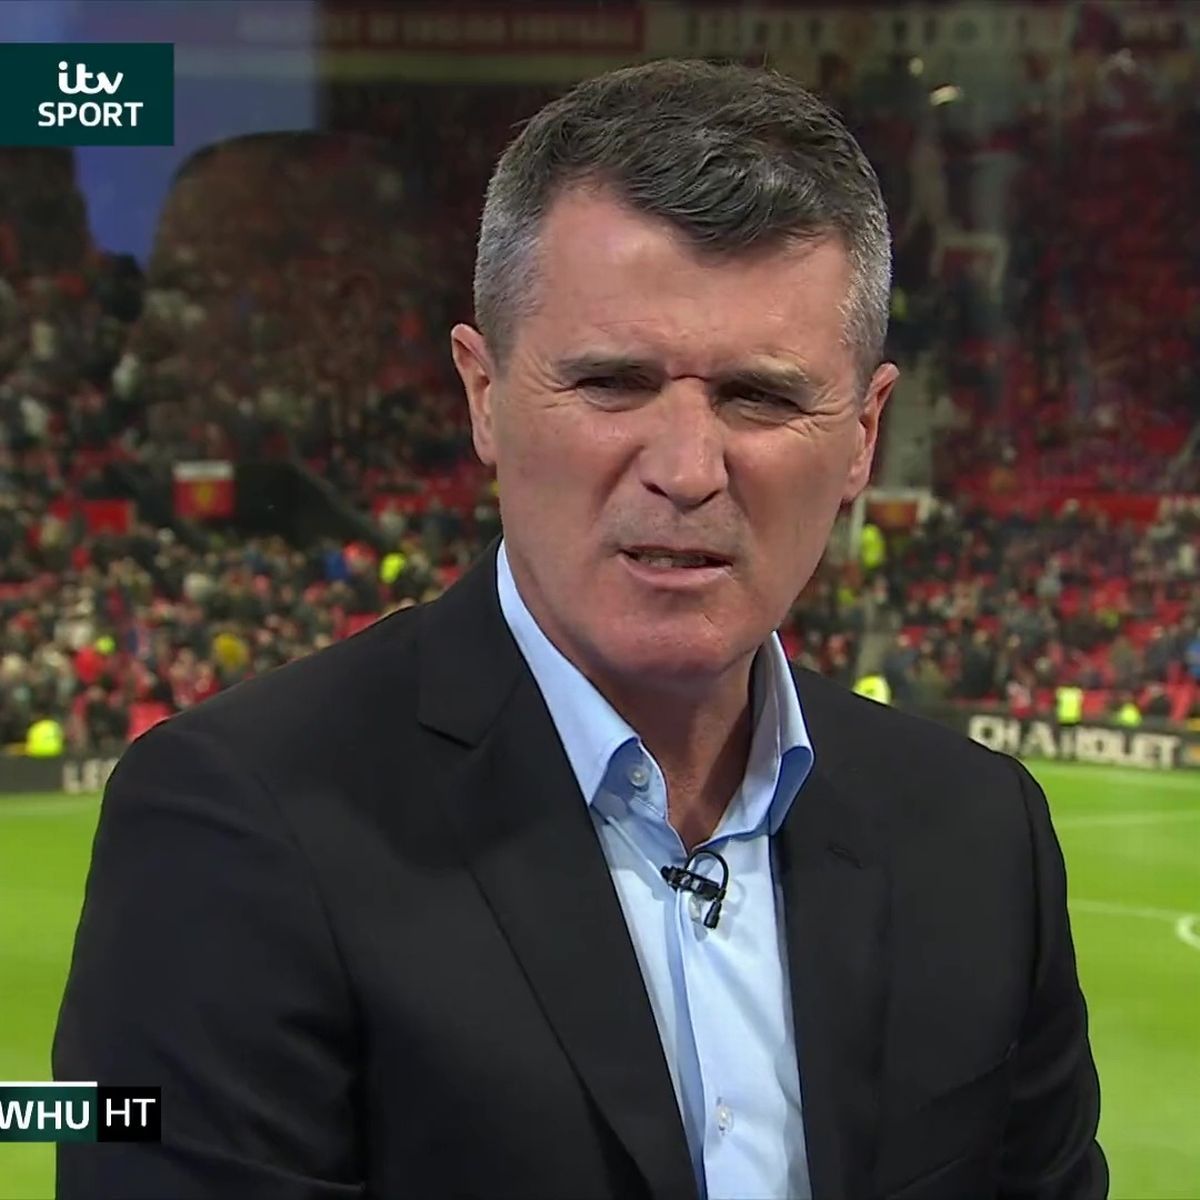 Everyone knows Roy Keane is a mad bastard.

The United legend humiliated teammates, knocked out opponents and scrapped with his own manager.

But that's not the half of it.

From drunken headbutts to kung fu kicks in the dressing room, this is his story...